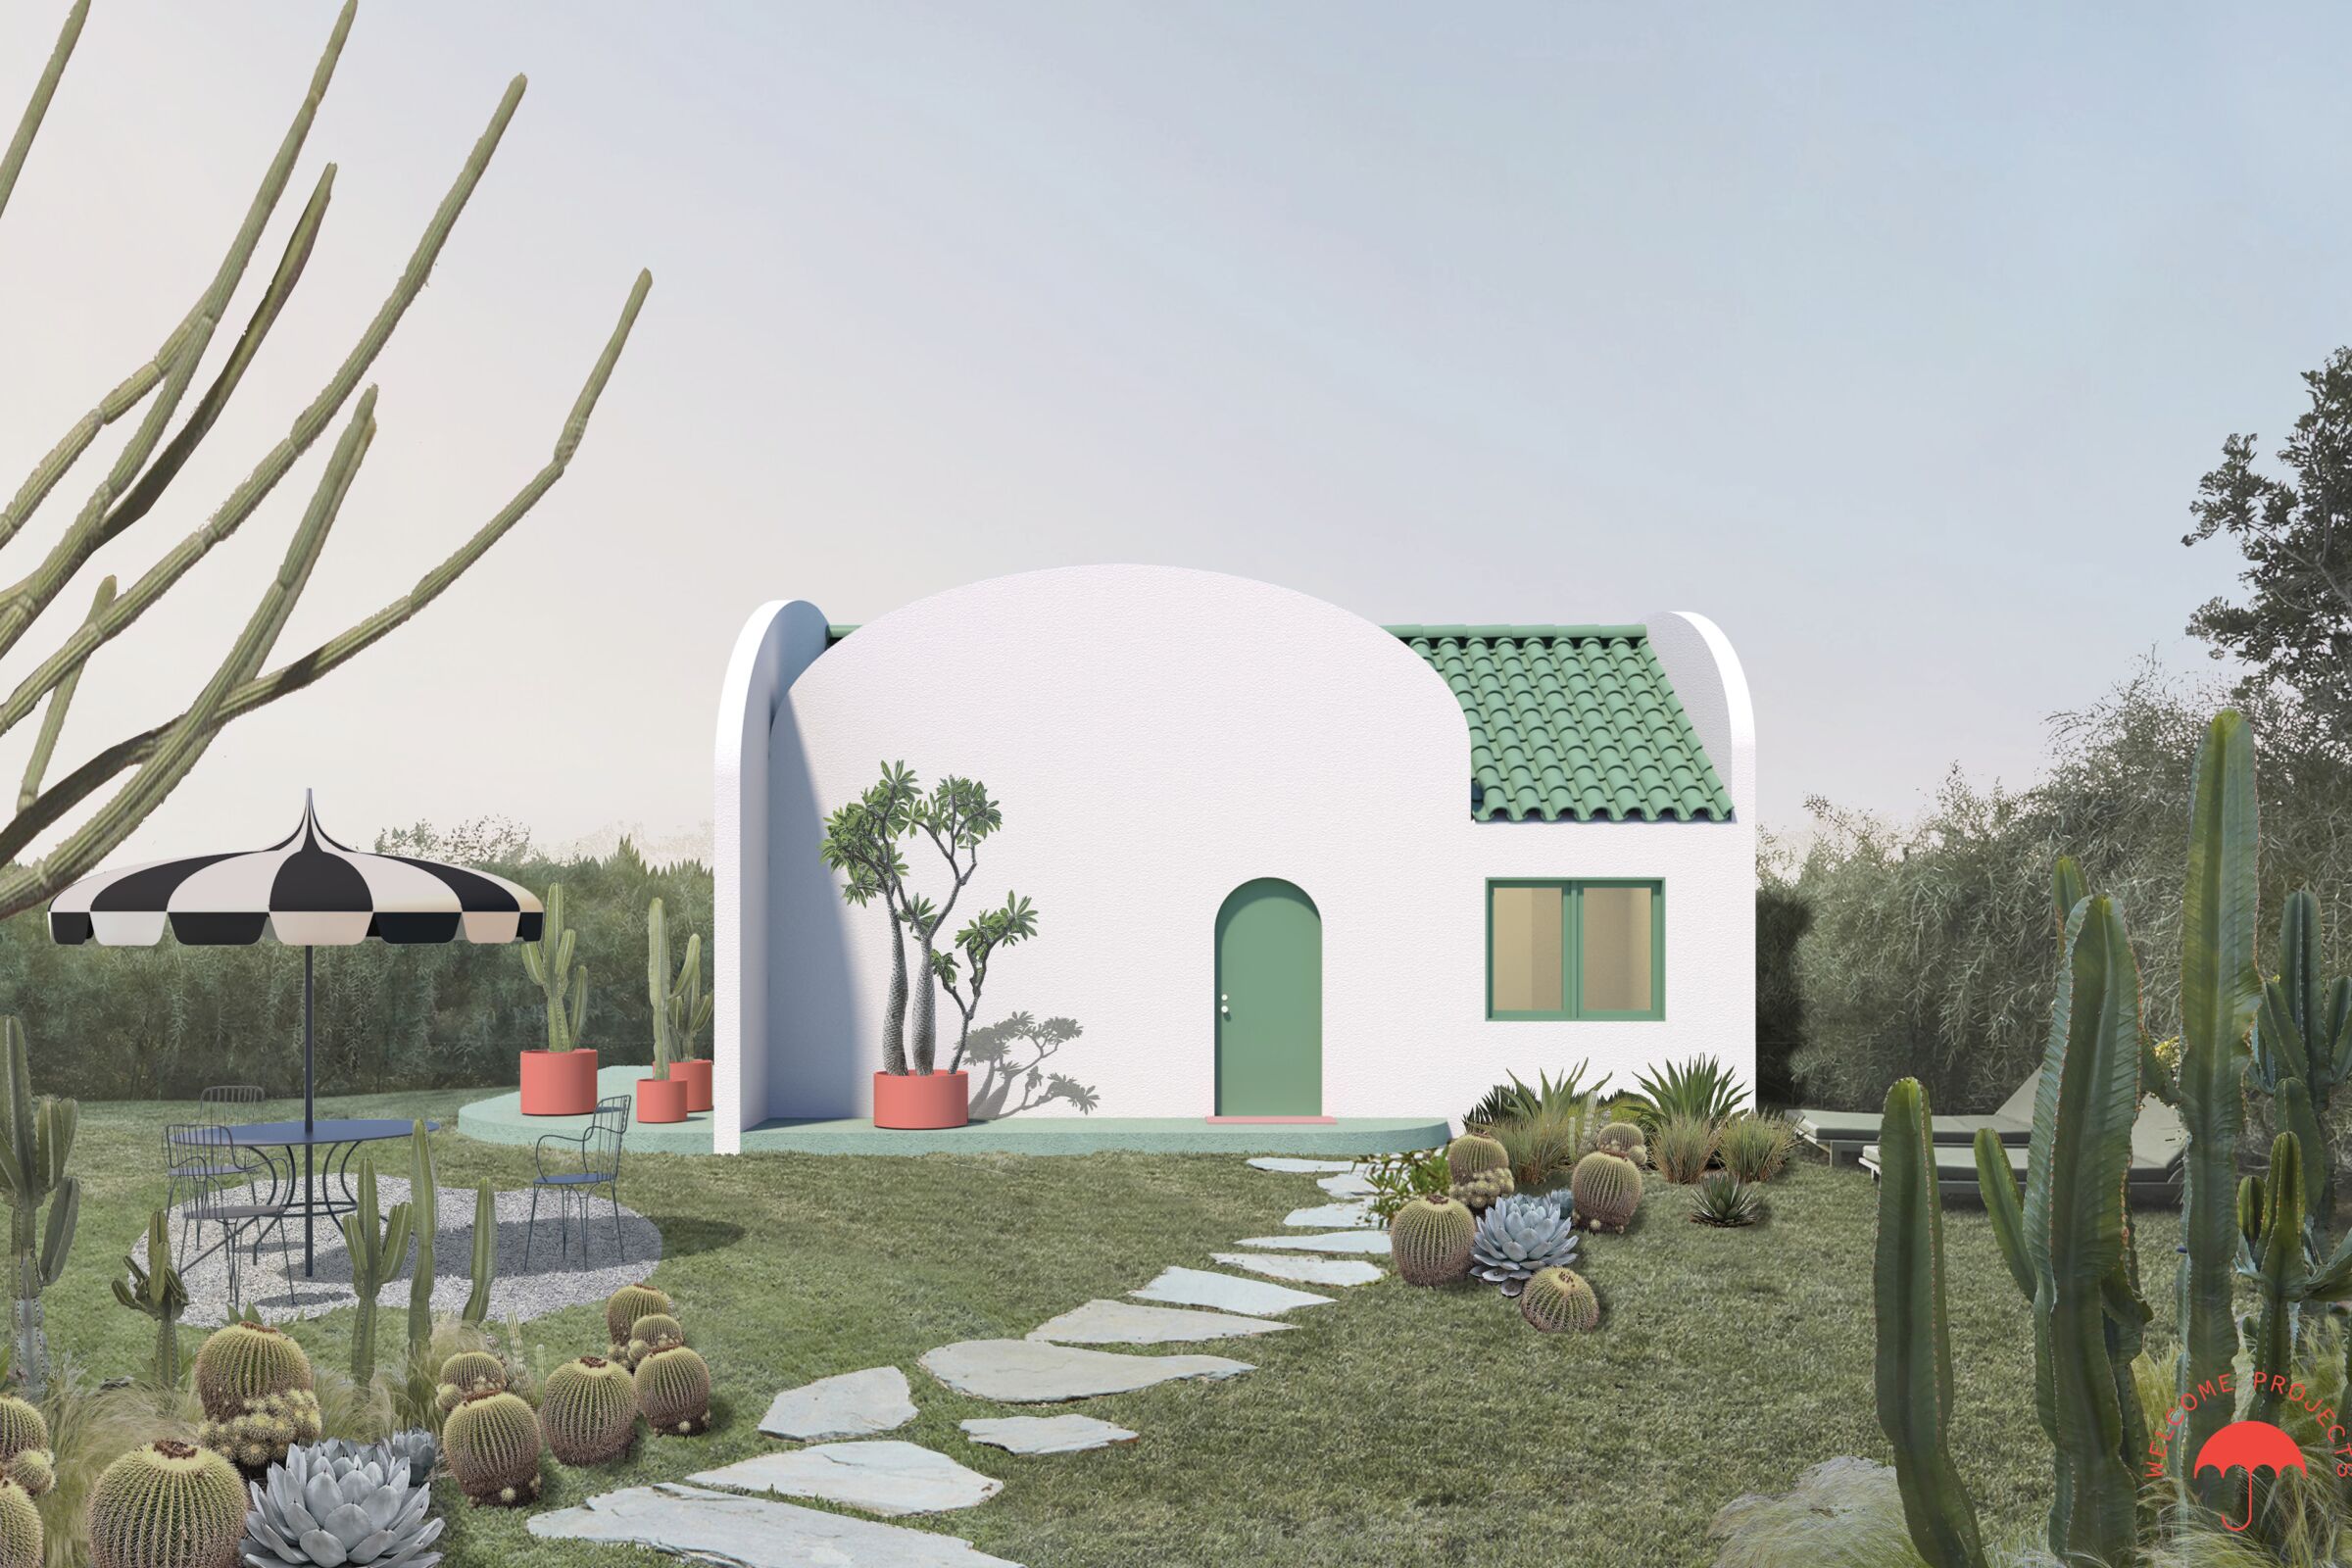 An image of a small white house with a green tile roof and desert landscaping.